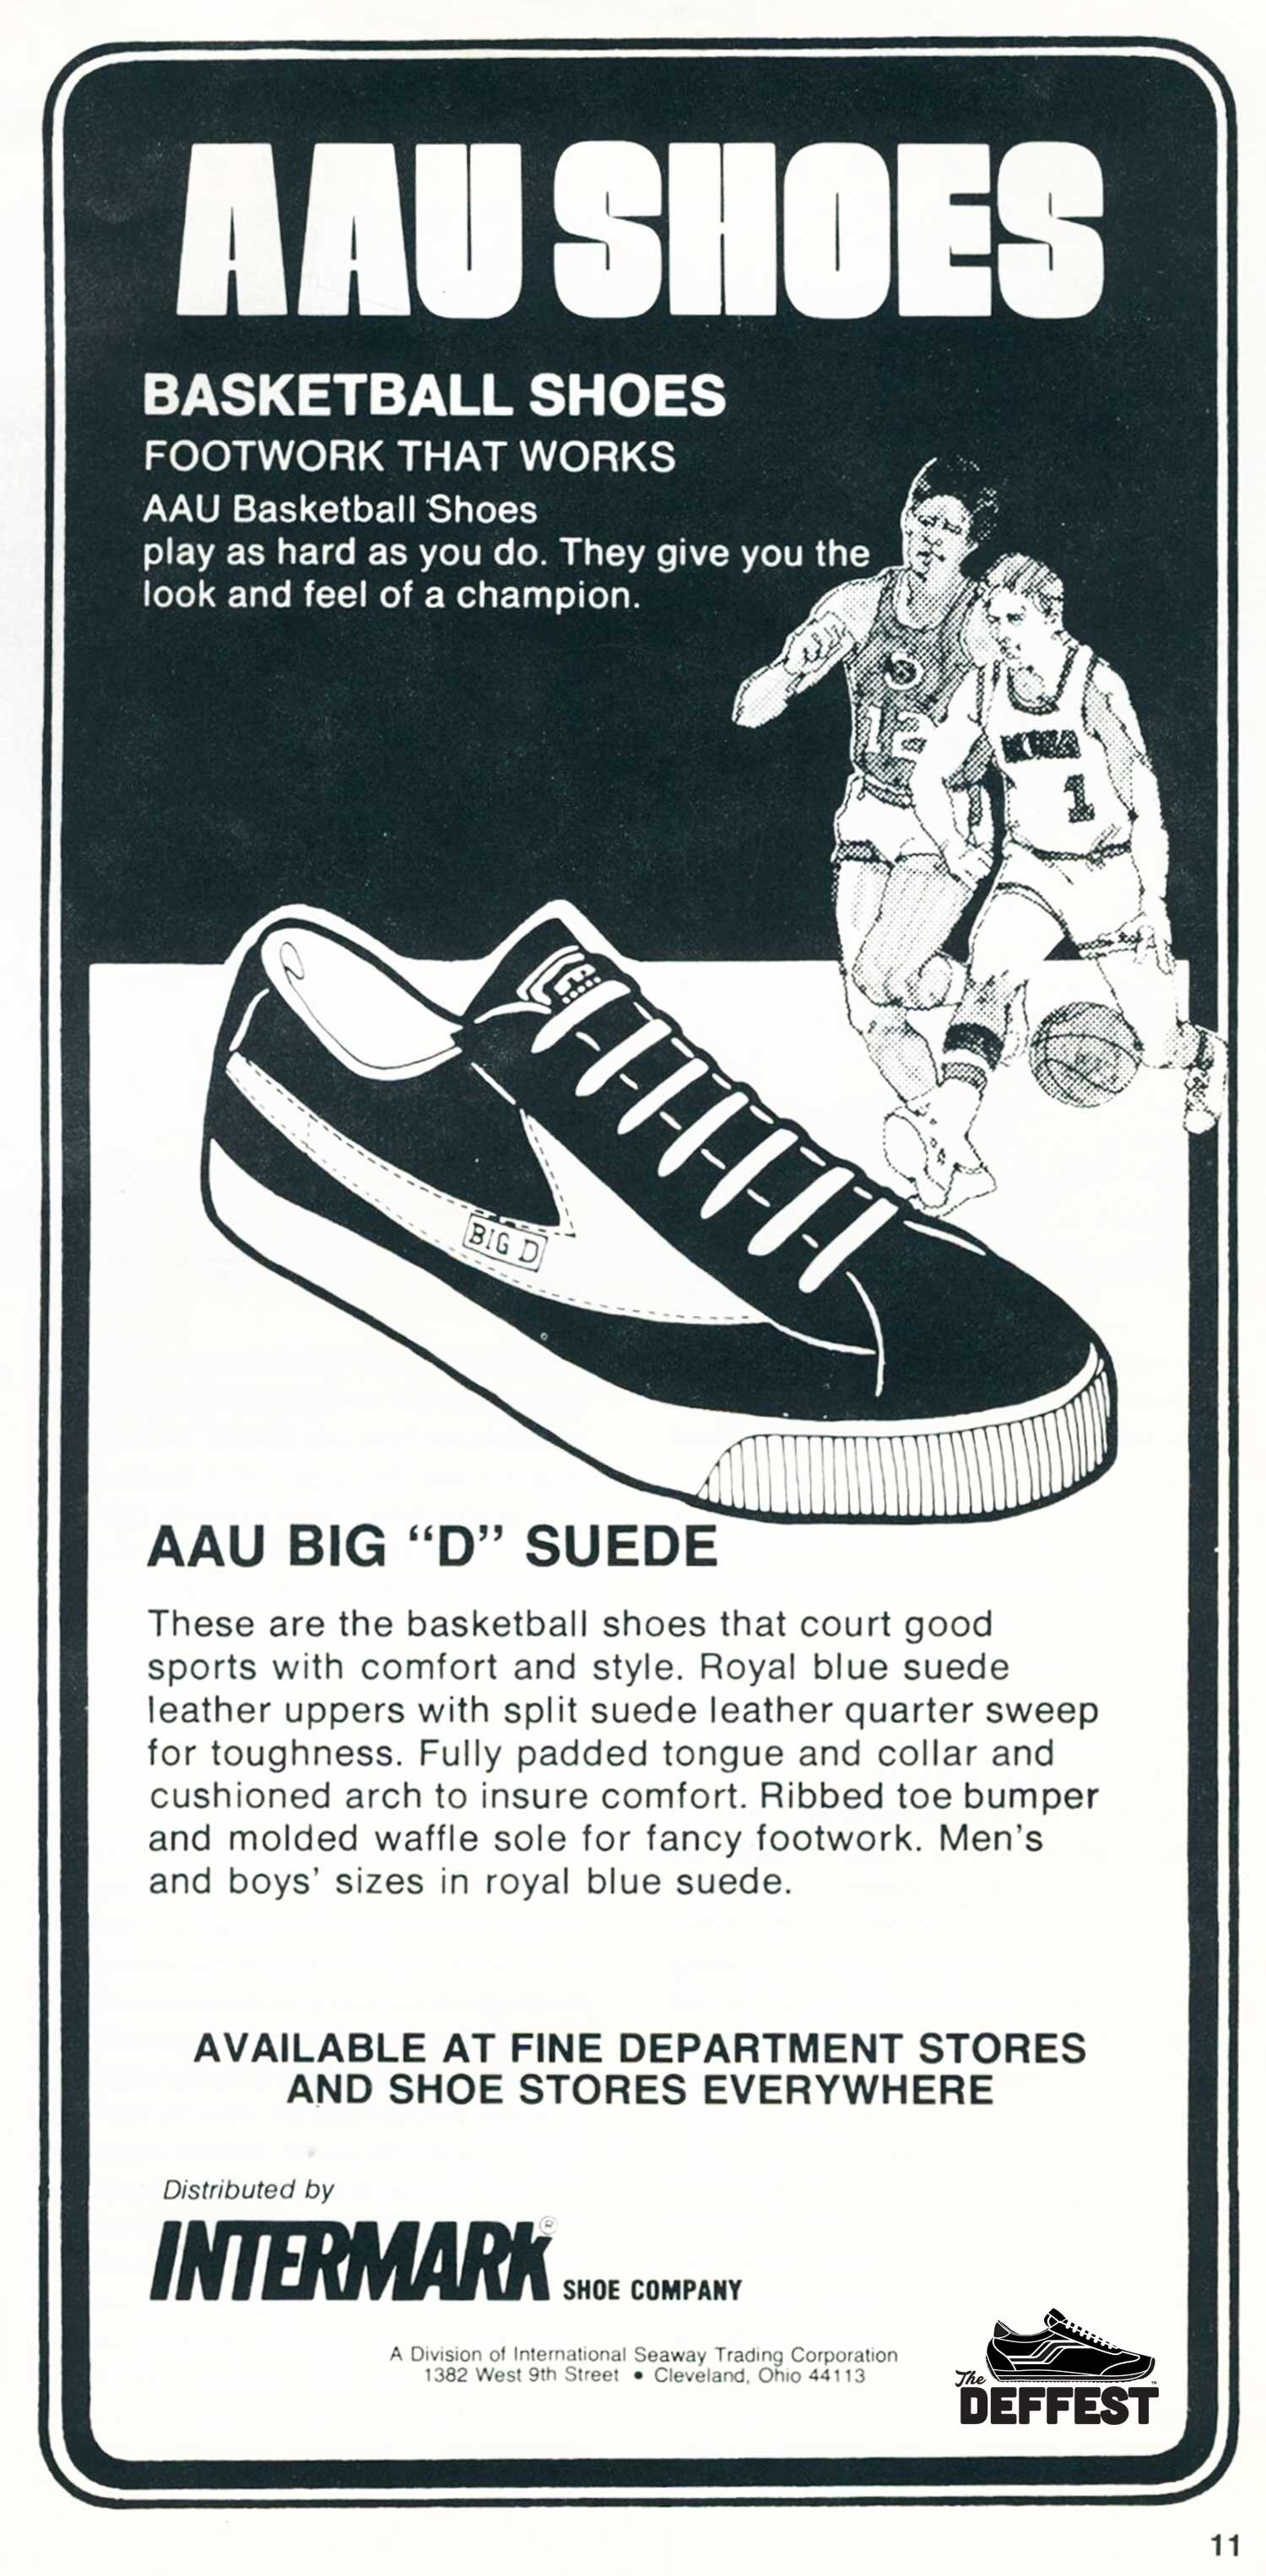 1970s basketball shoes